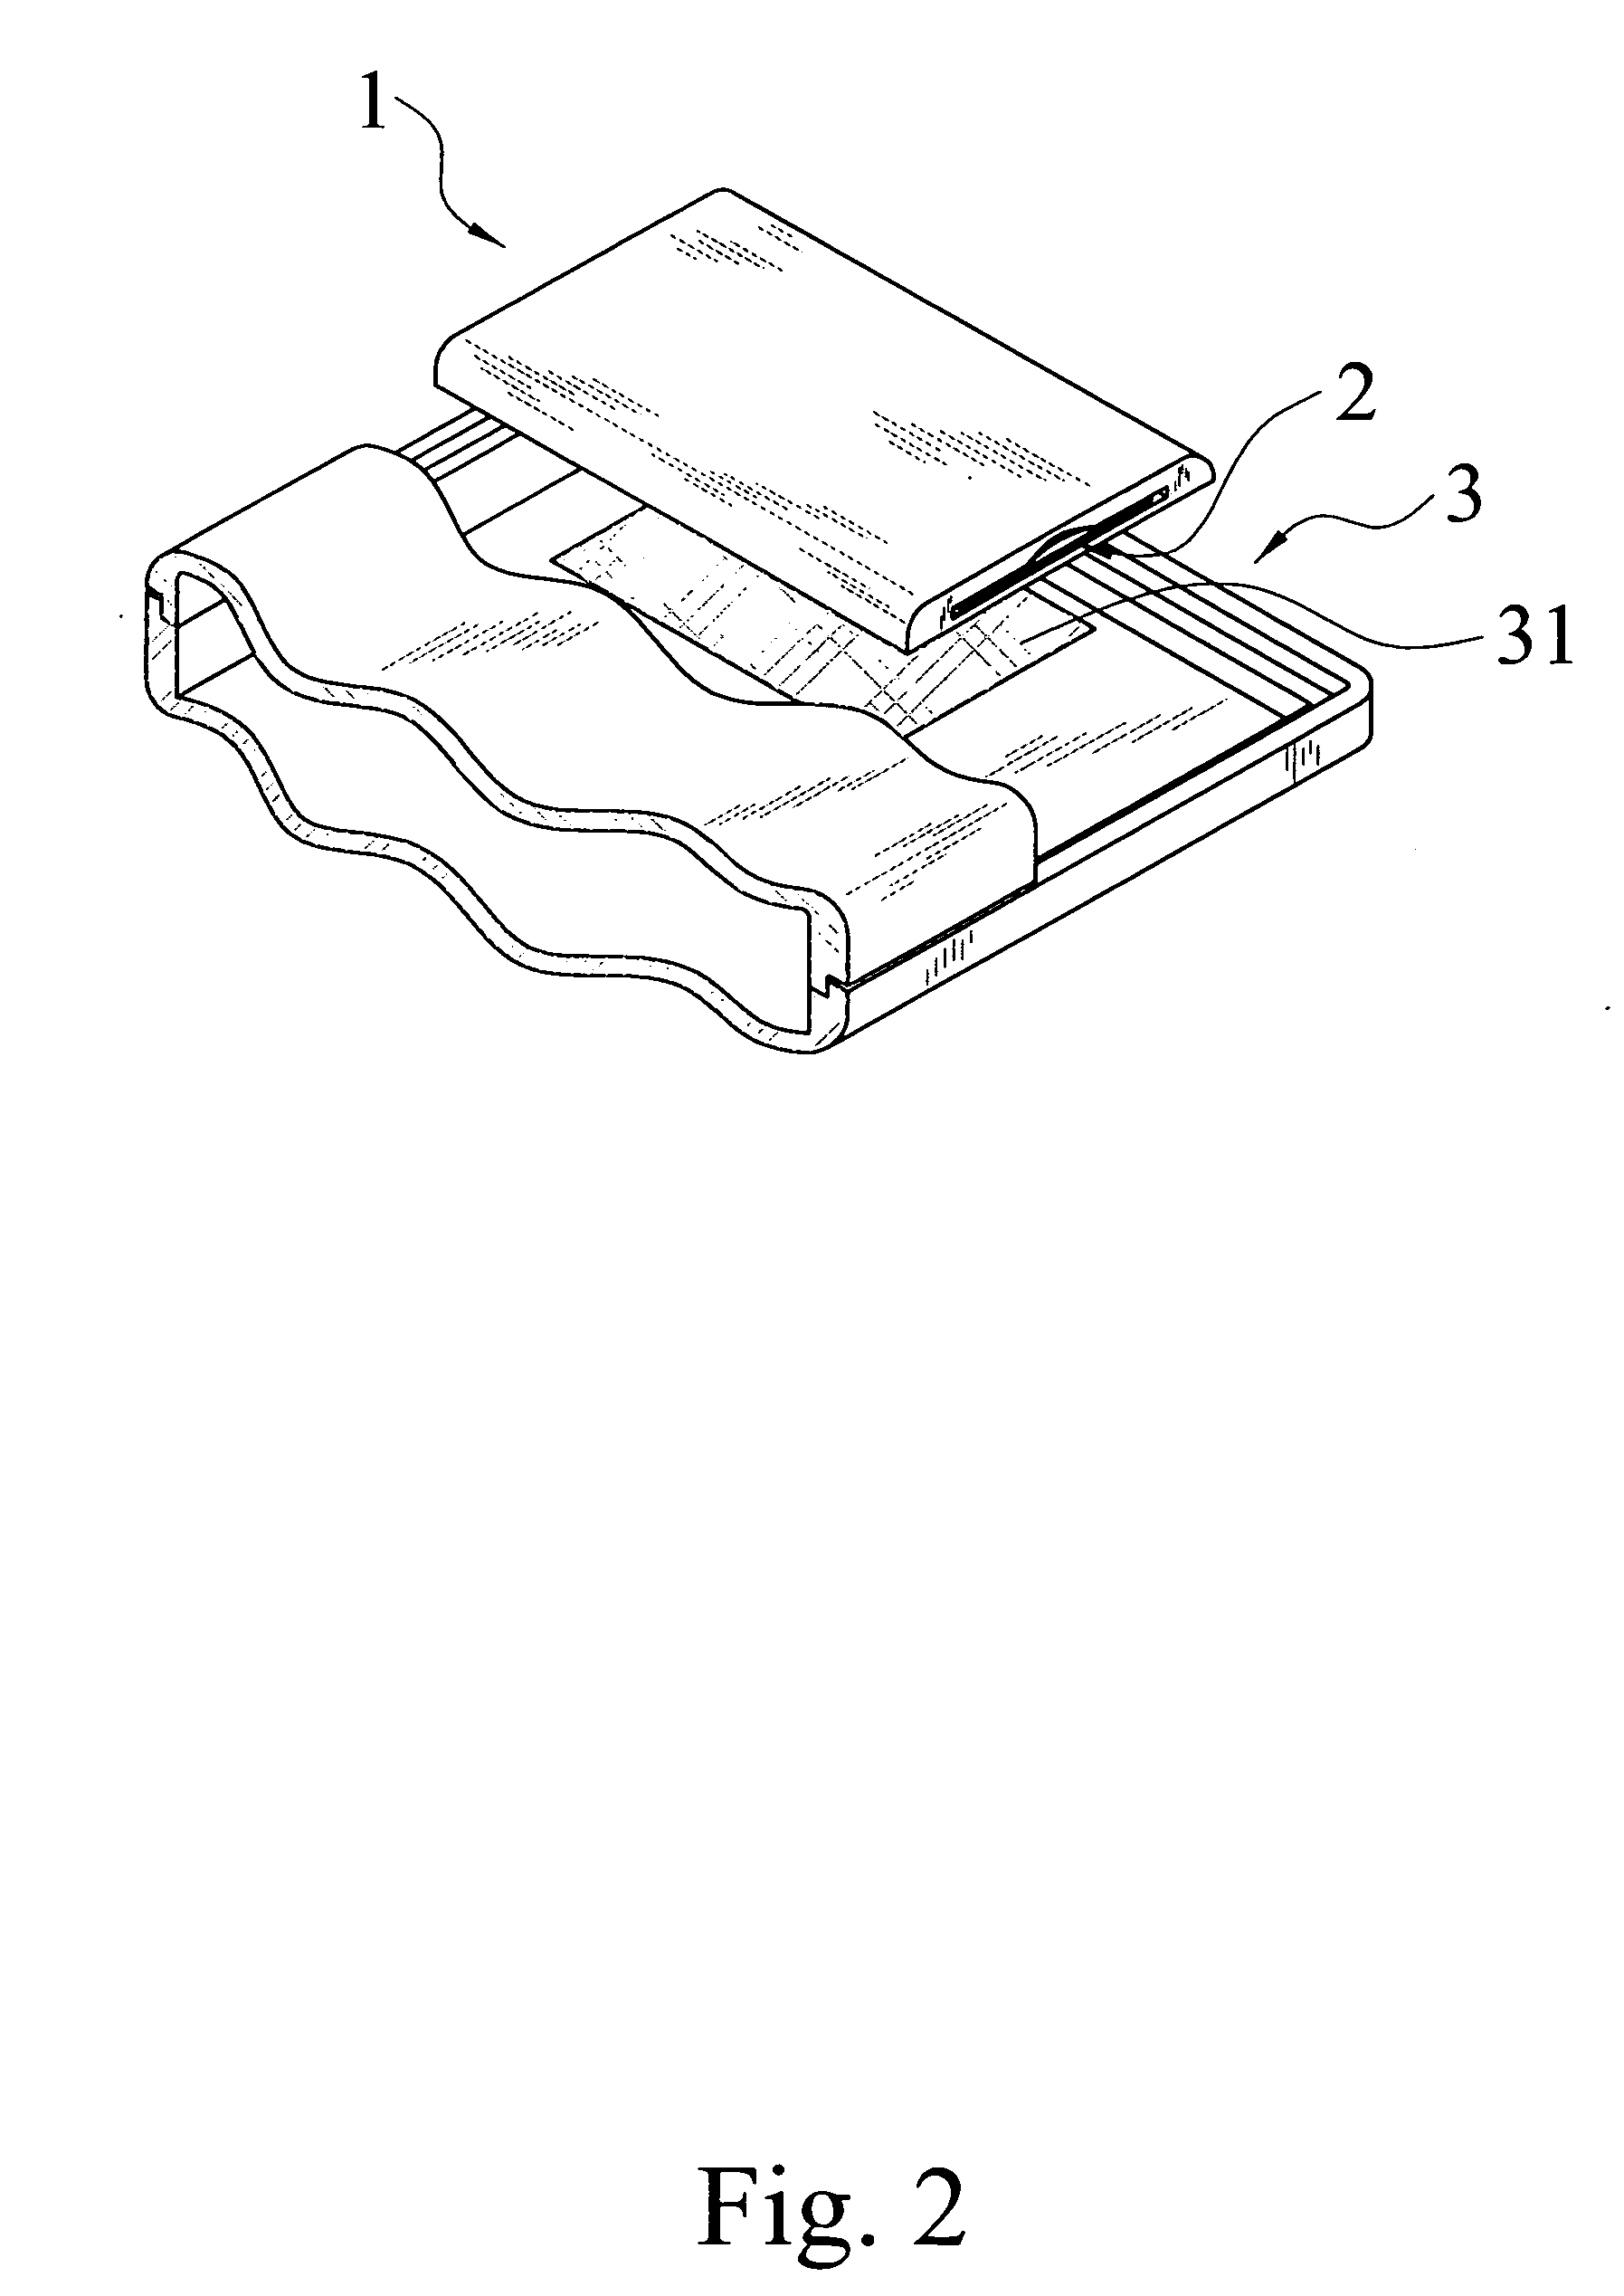 Method and apparatus for radio frequency identification